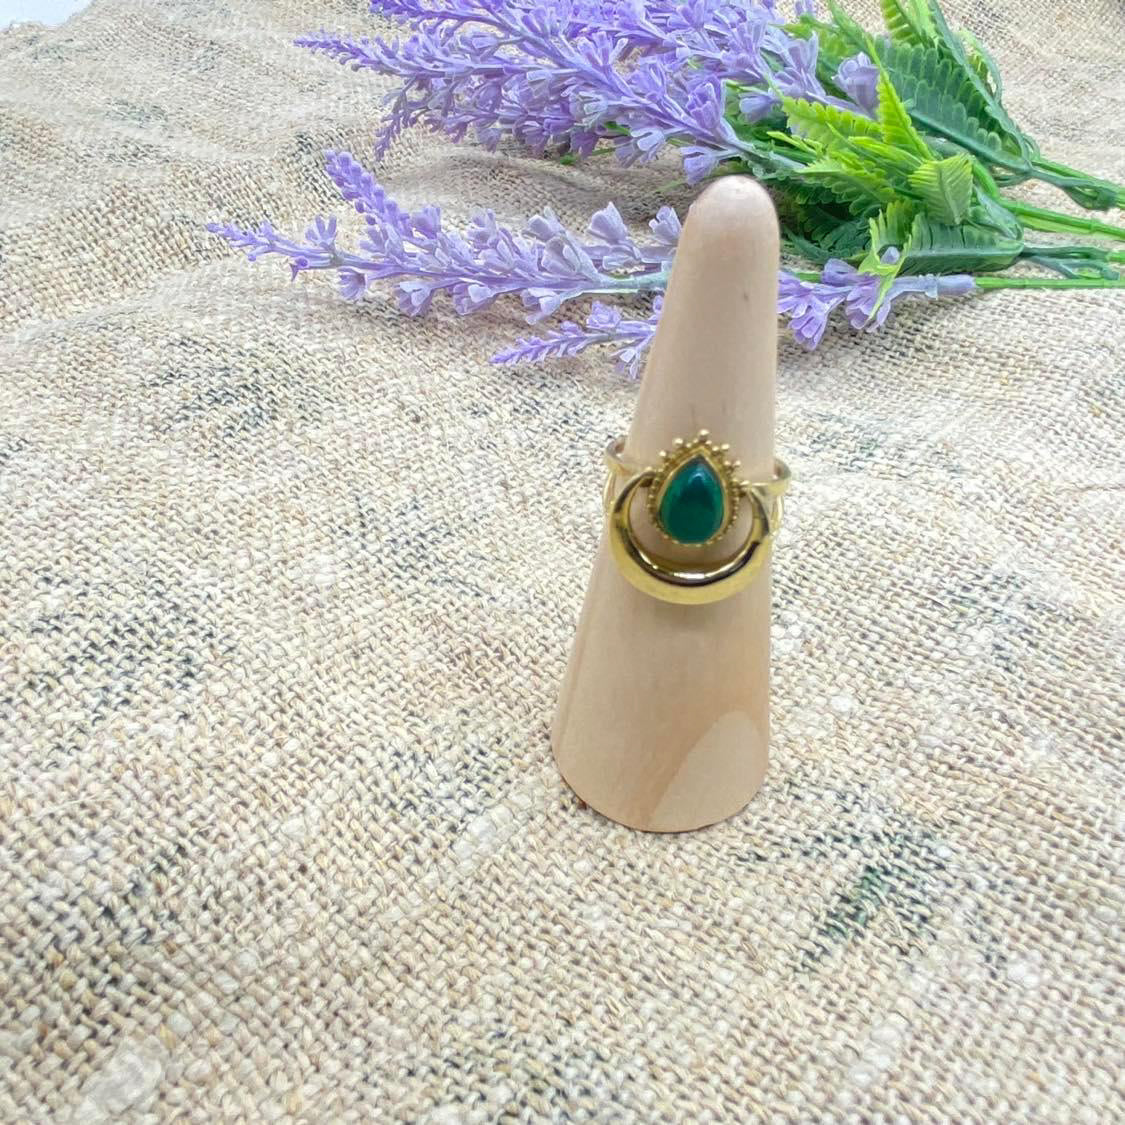 Crescent Moon Style Bohemian Rings, Handmade Jewelry, Gift For Her, Stackable Rings, Boho Style Rings, Adjustable Gold Rings, Vintage Style